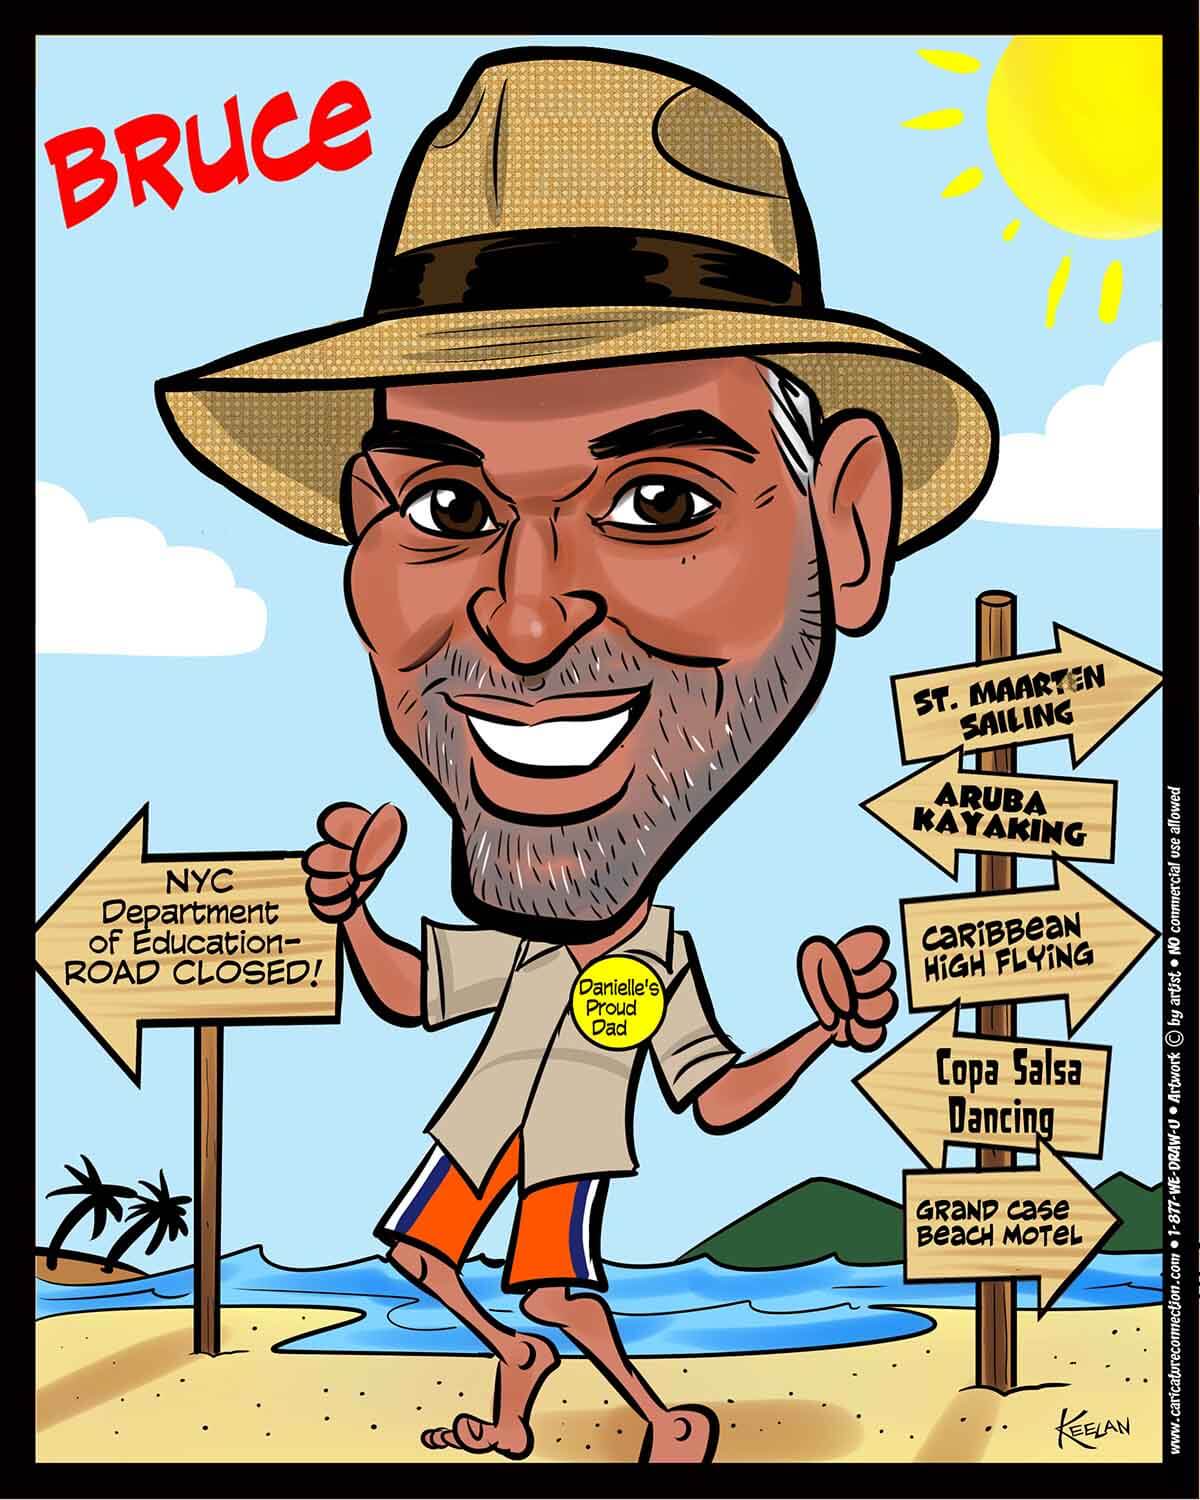 Caricature of man on the beach